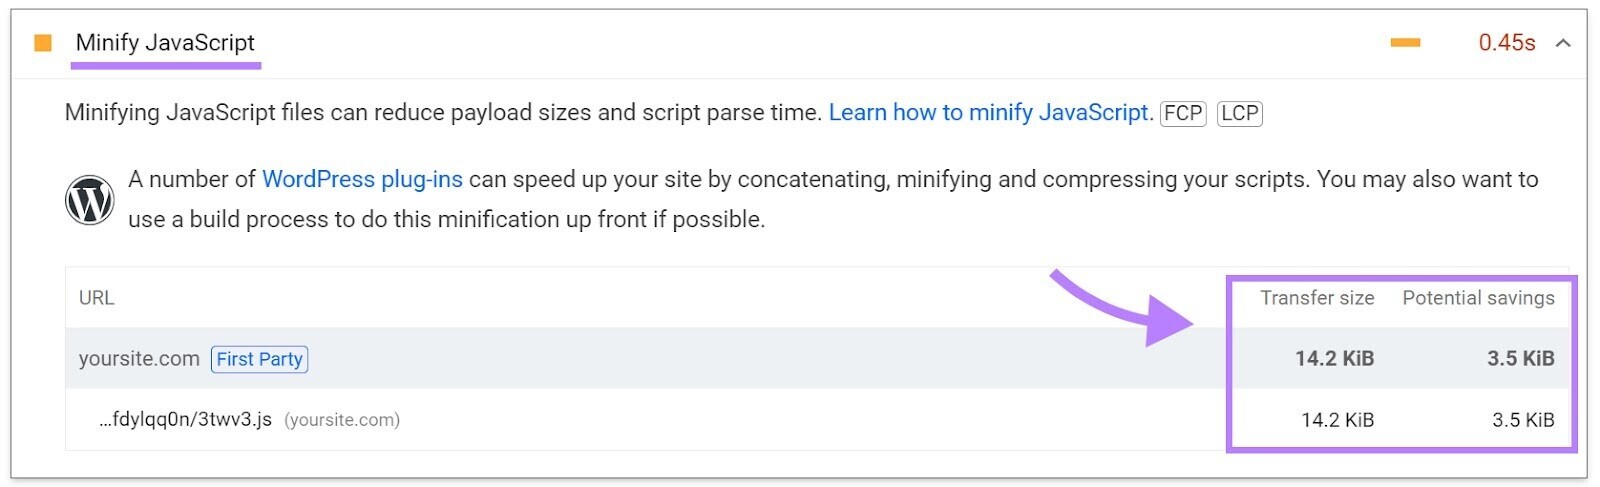 "Minify JavaScript" section on PSI Diagnostics with "Transfer size" and "Potential savings" columns highlighted.